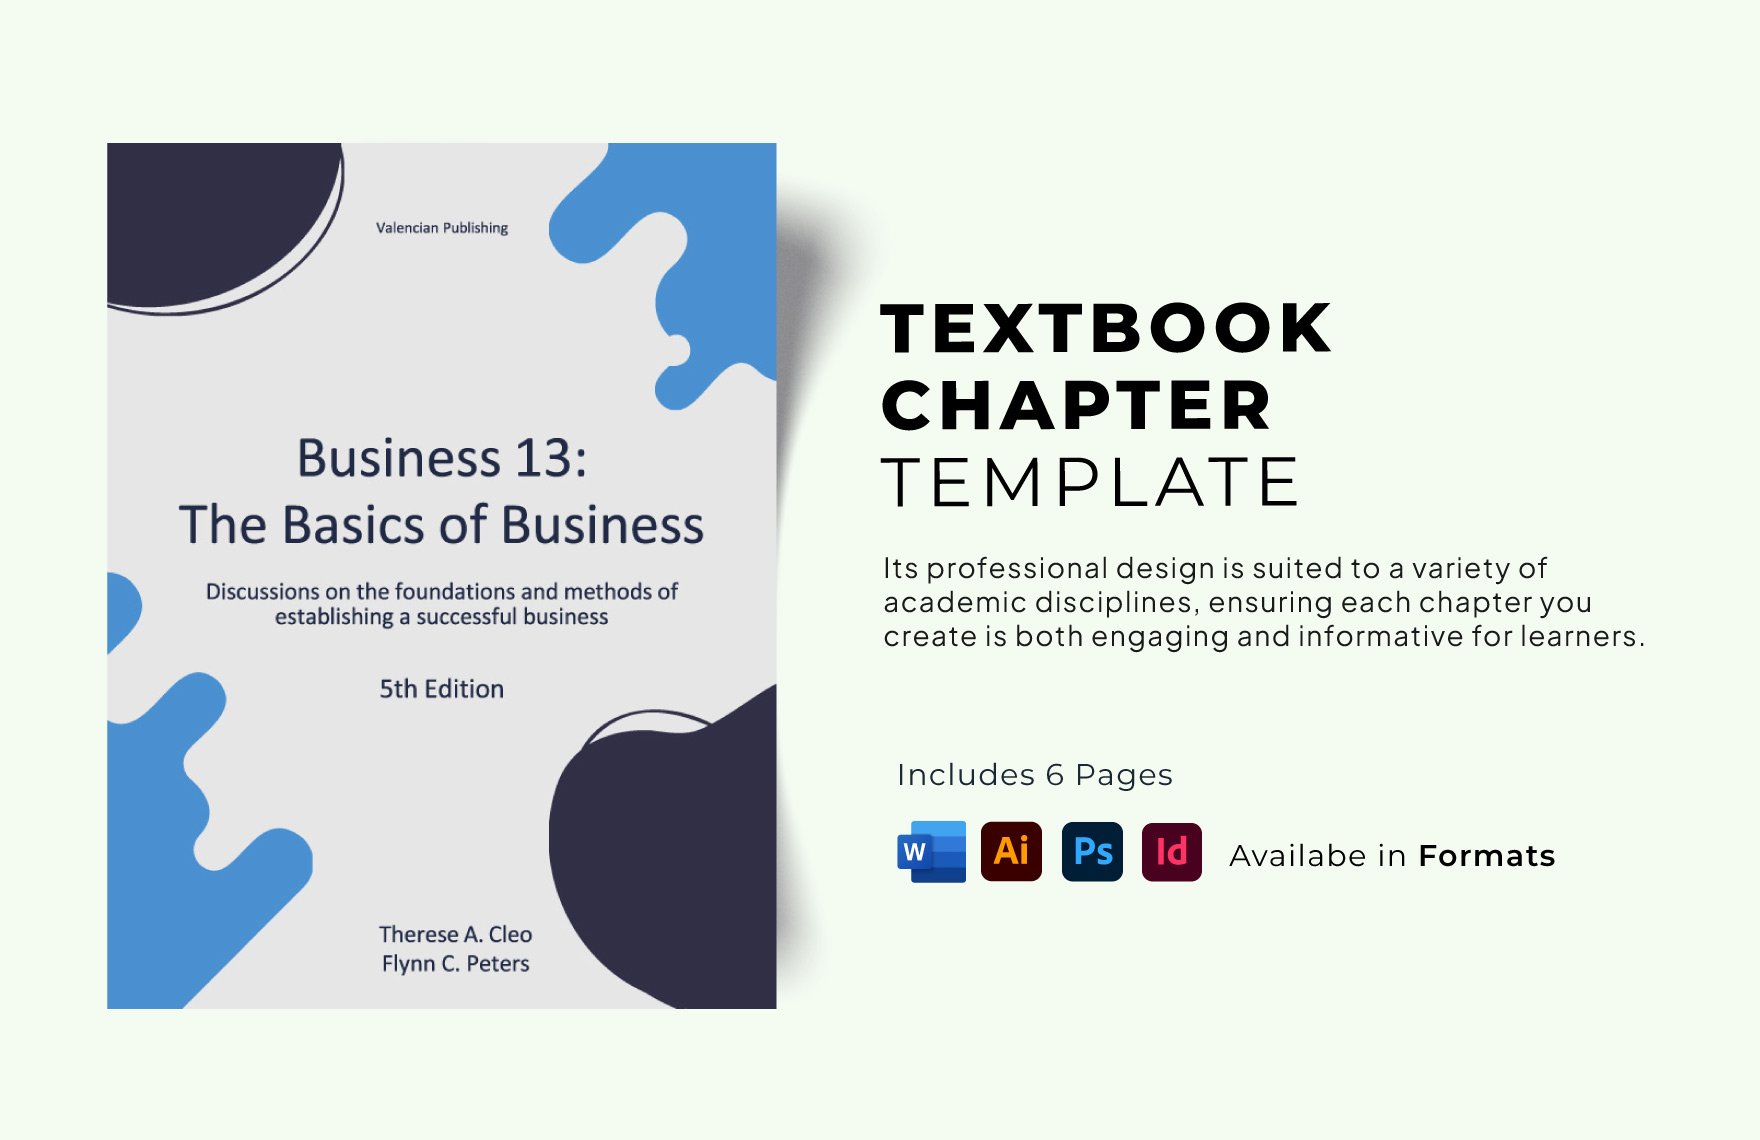 Textbook Chapter Template